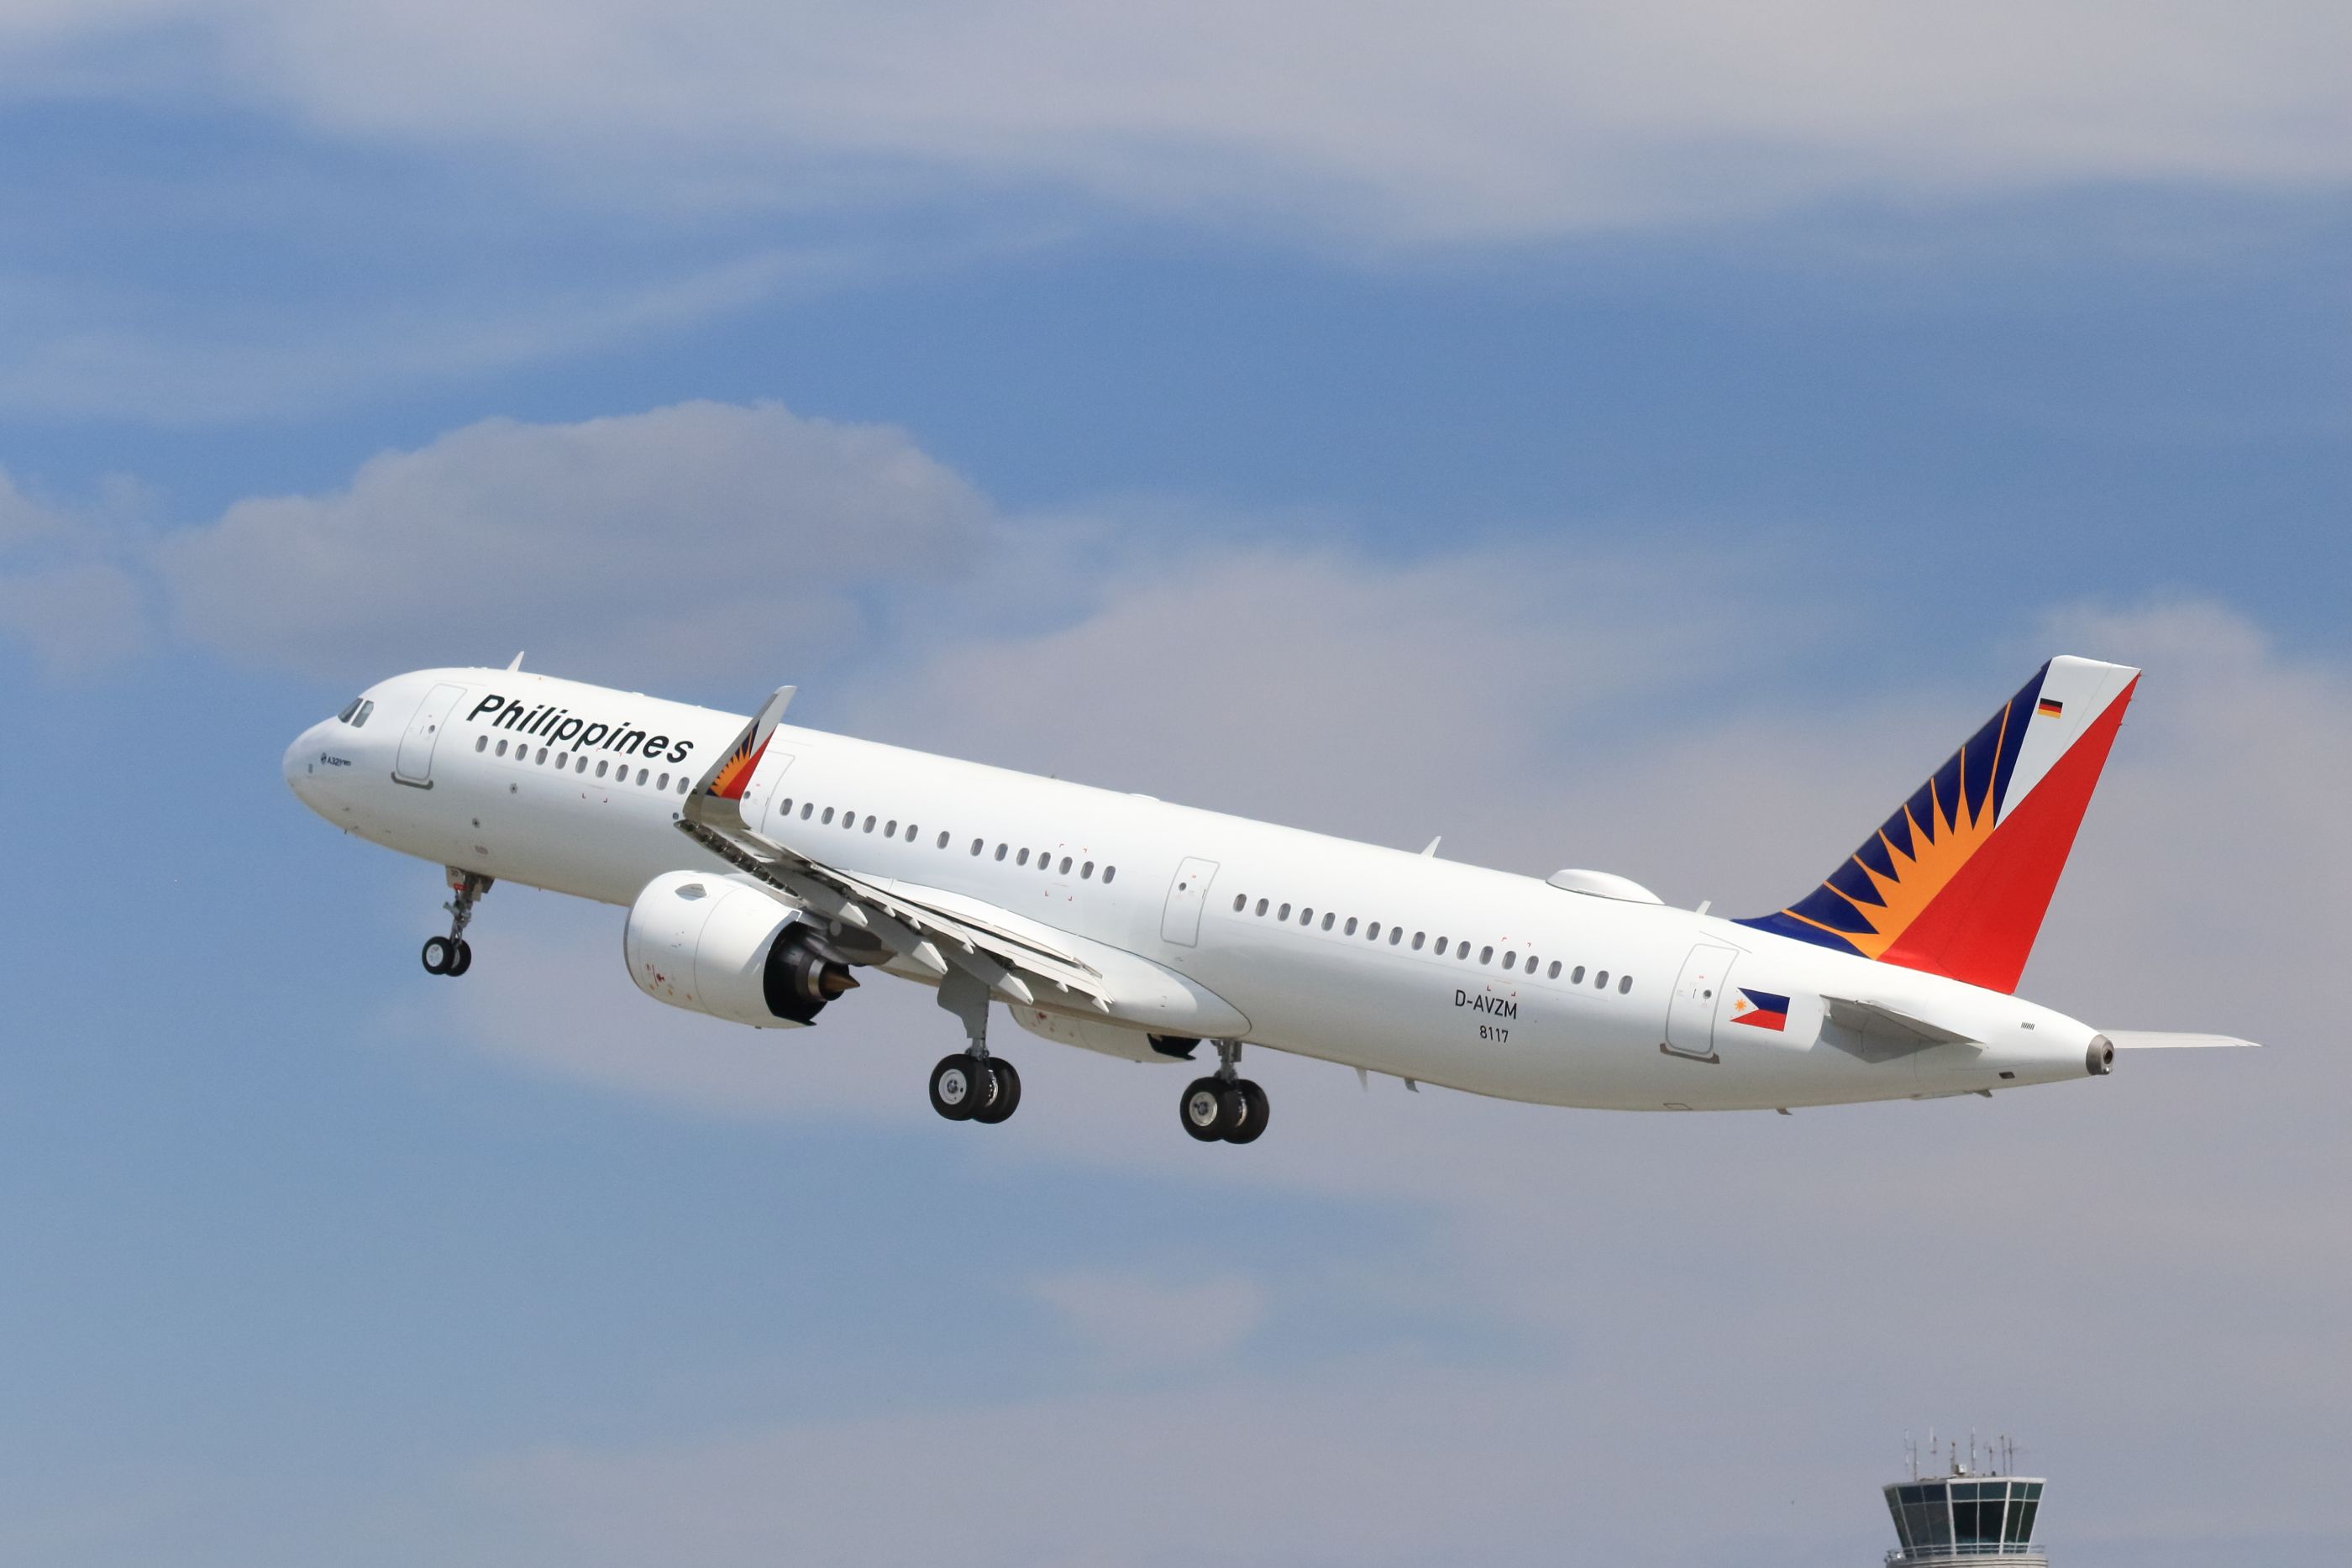 Philippine Airlines Airbus A321neo